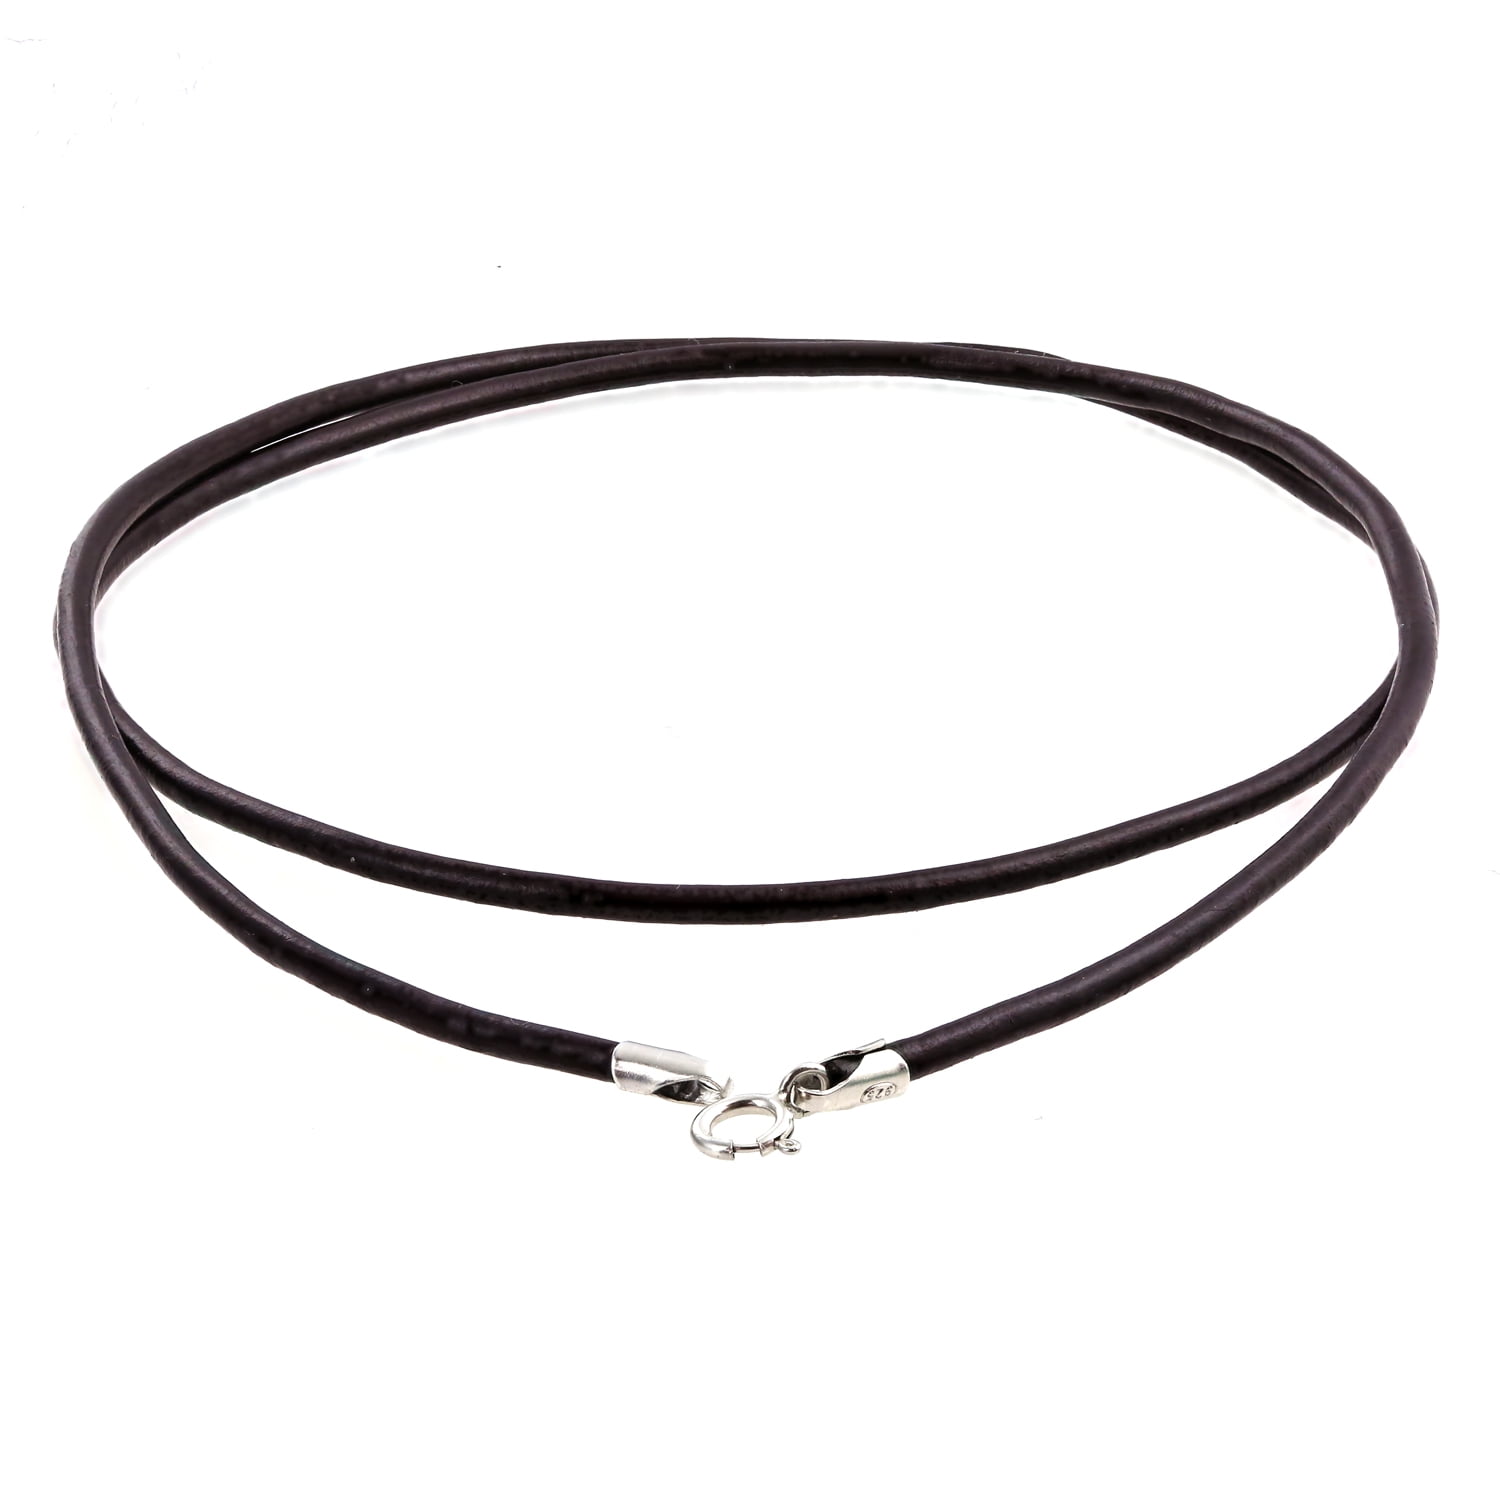 Genuine Smooth Brown Black Leather Cord Necklace for Men for Women Teen Silver Plated Lobster Clasp 14 16 18 20 24 Inch 